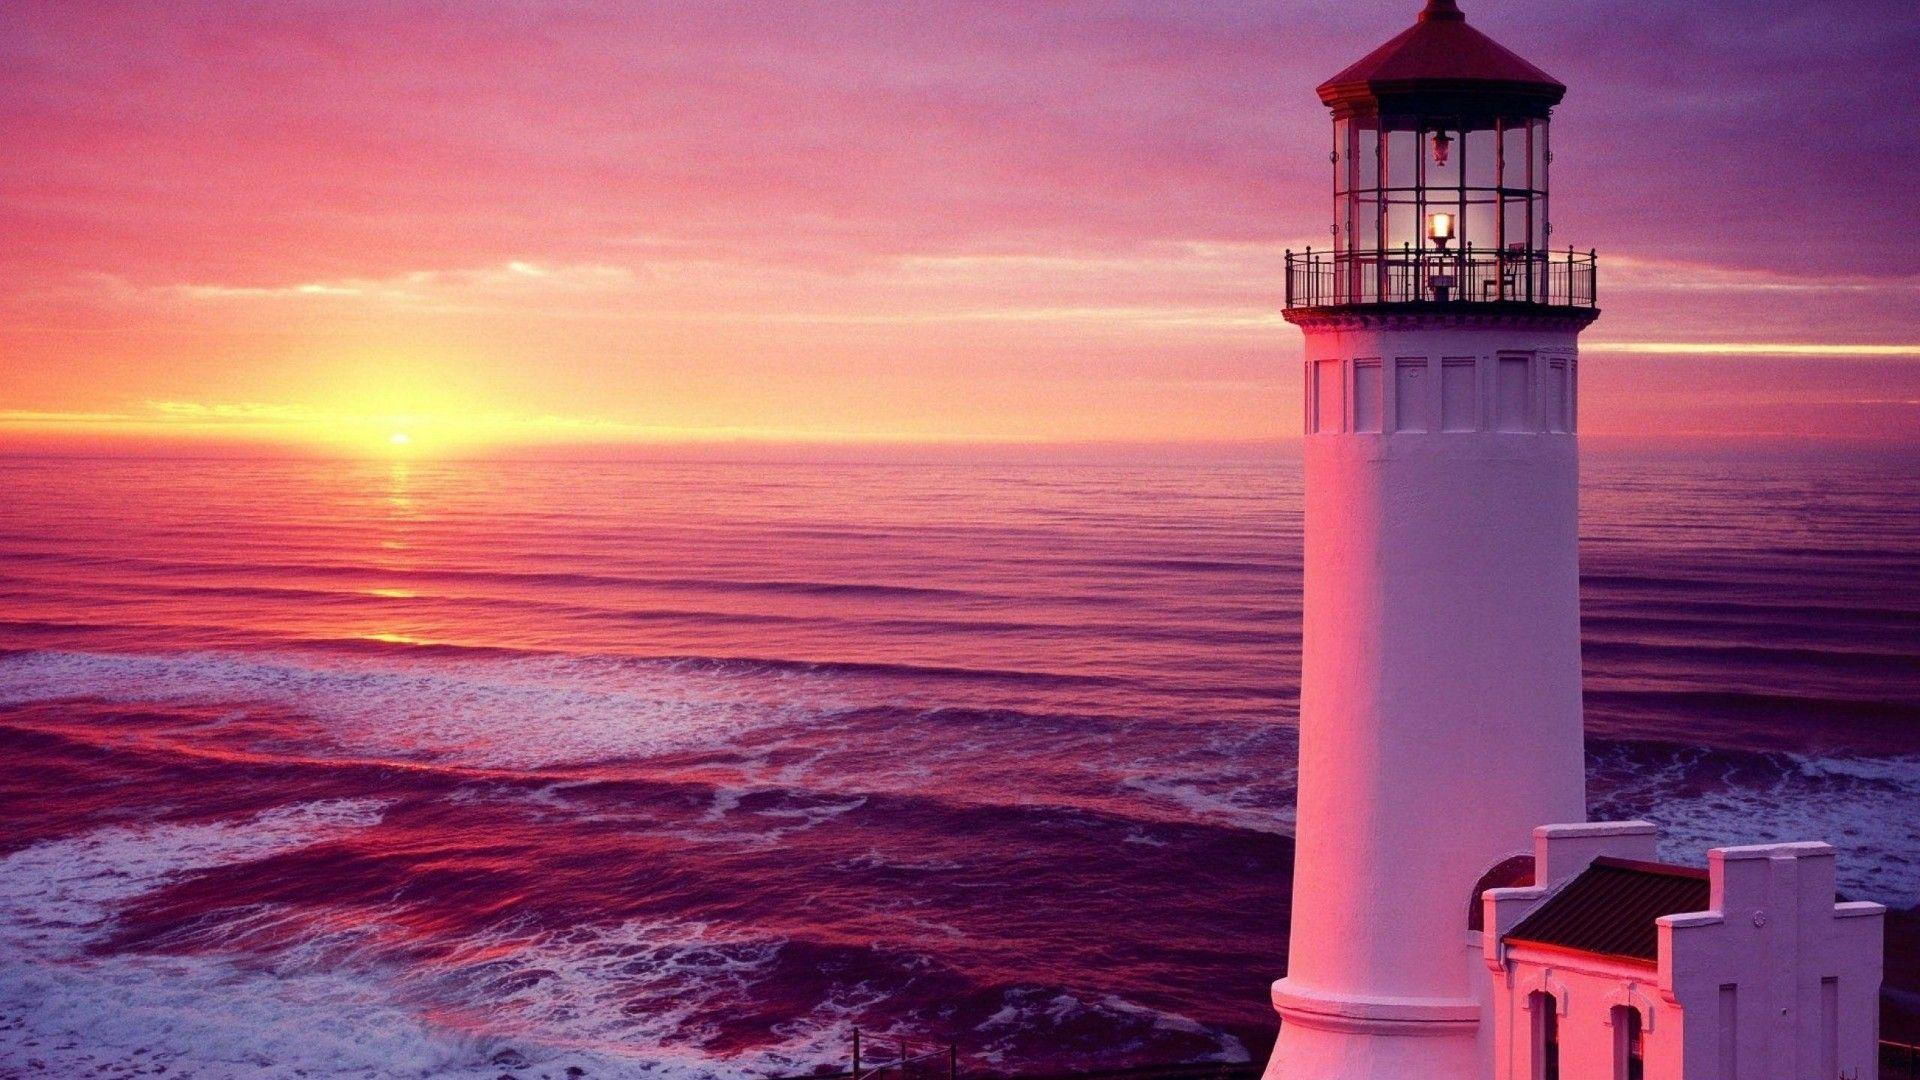 North Head Lighthouse In The Pink Sunset Wallpaper. Wallpaper